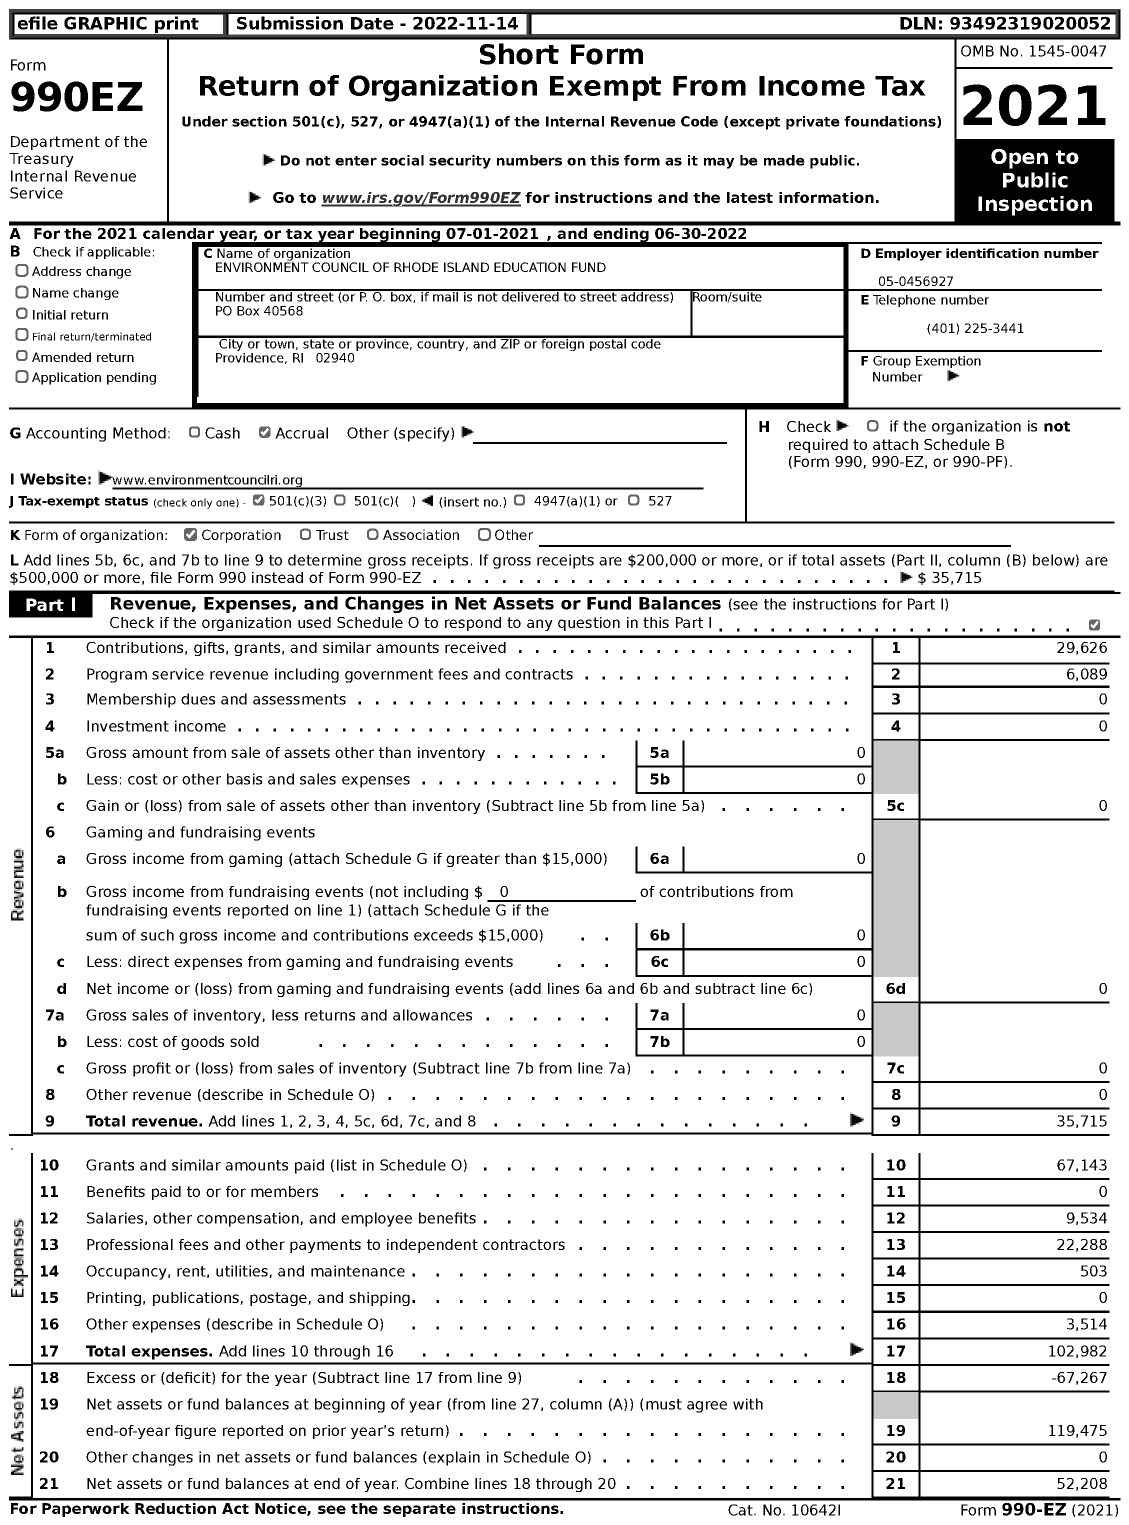 Image of first page of 2021 Form 990EZ for Environment Council of Rhode Island Education Fund